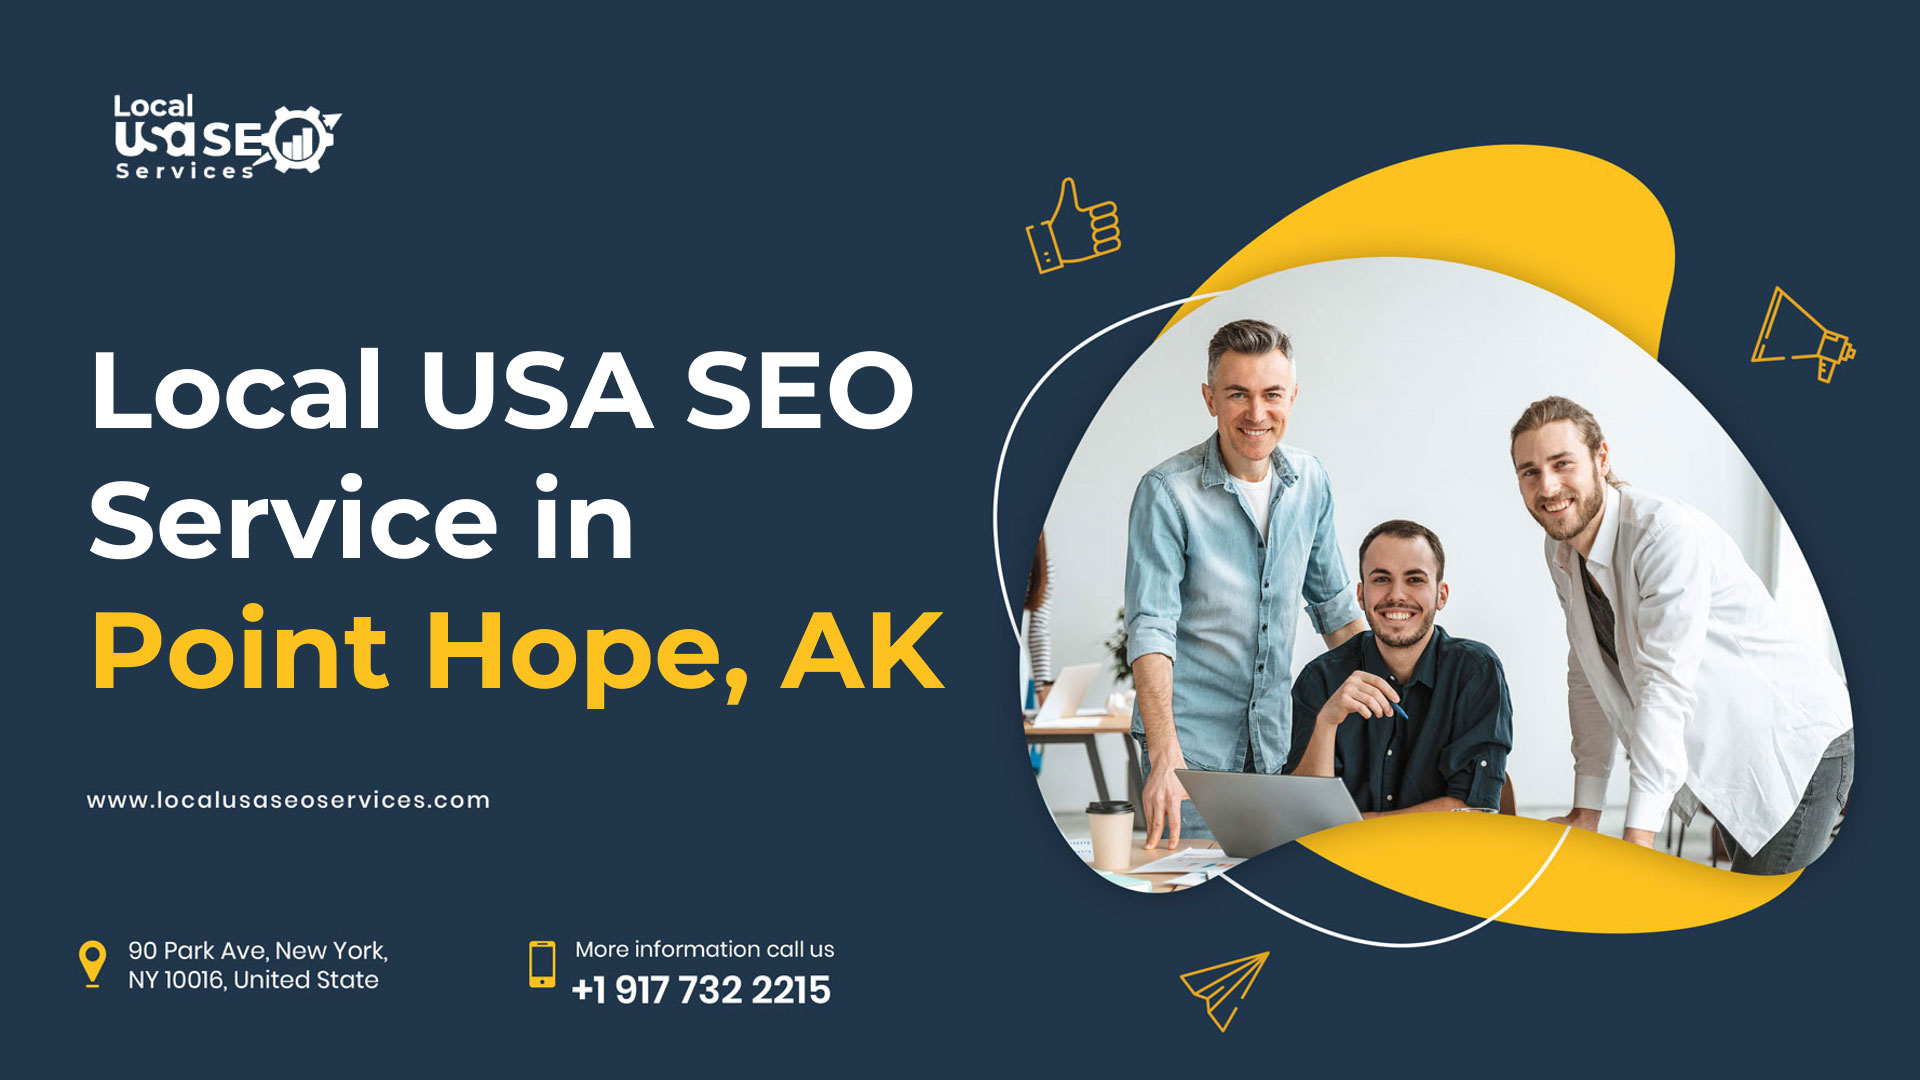 Local USA SEO Service in Point Hope, AK